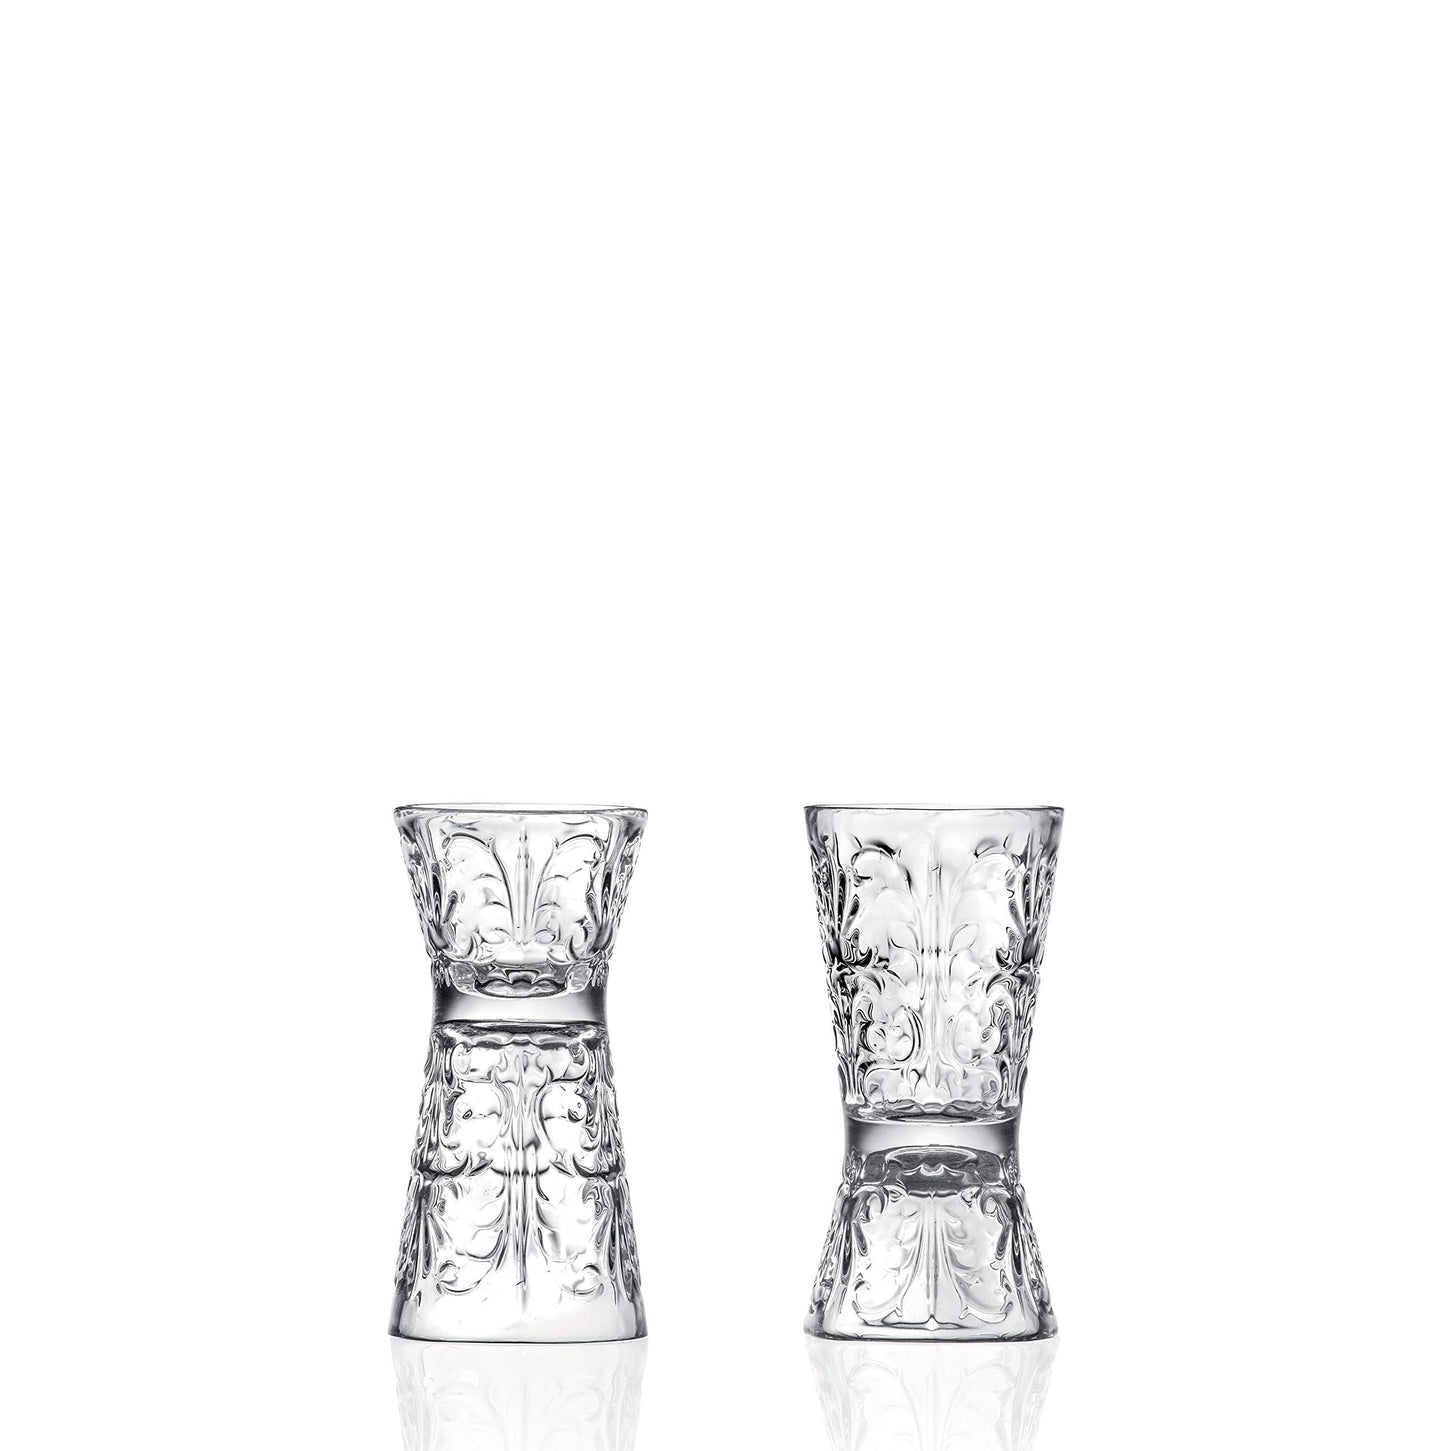 Glass - Reversible Shot Glass - Jigger Tumbler - Designed Tumblers - Use for Liquor - Vodka - Cocktail - Set of 6 Glasses - One side is 1 oz, Other Side is 2 oz. - Made in Europe - By Barski